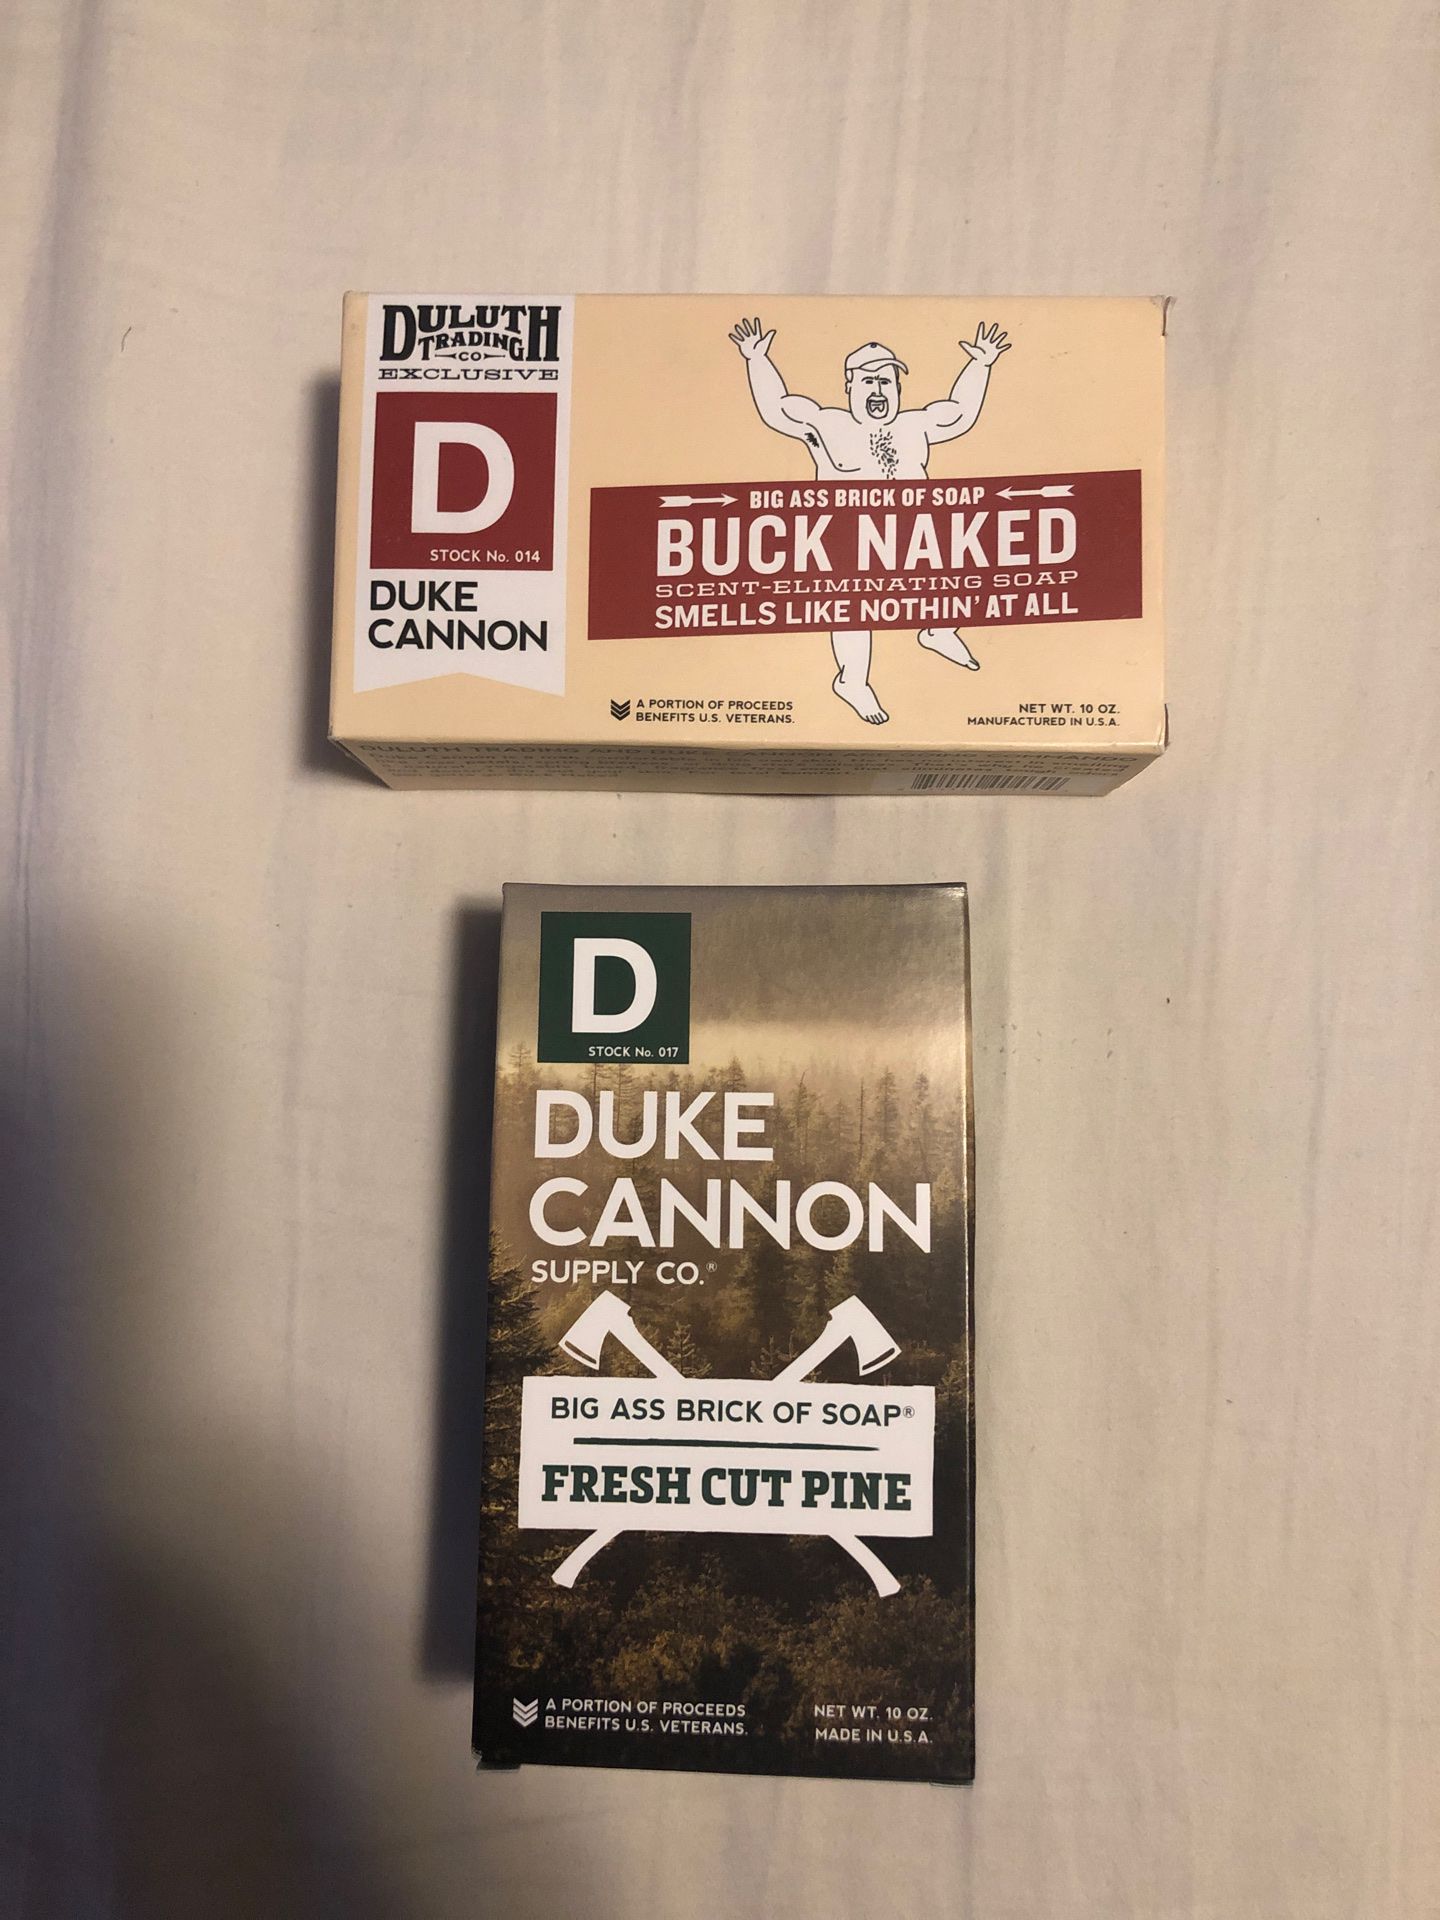 Duke Cannon Big Ass Brick of Soap Fresh Cut Pine and Buck Naked 1 or each